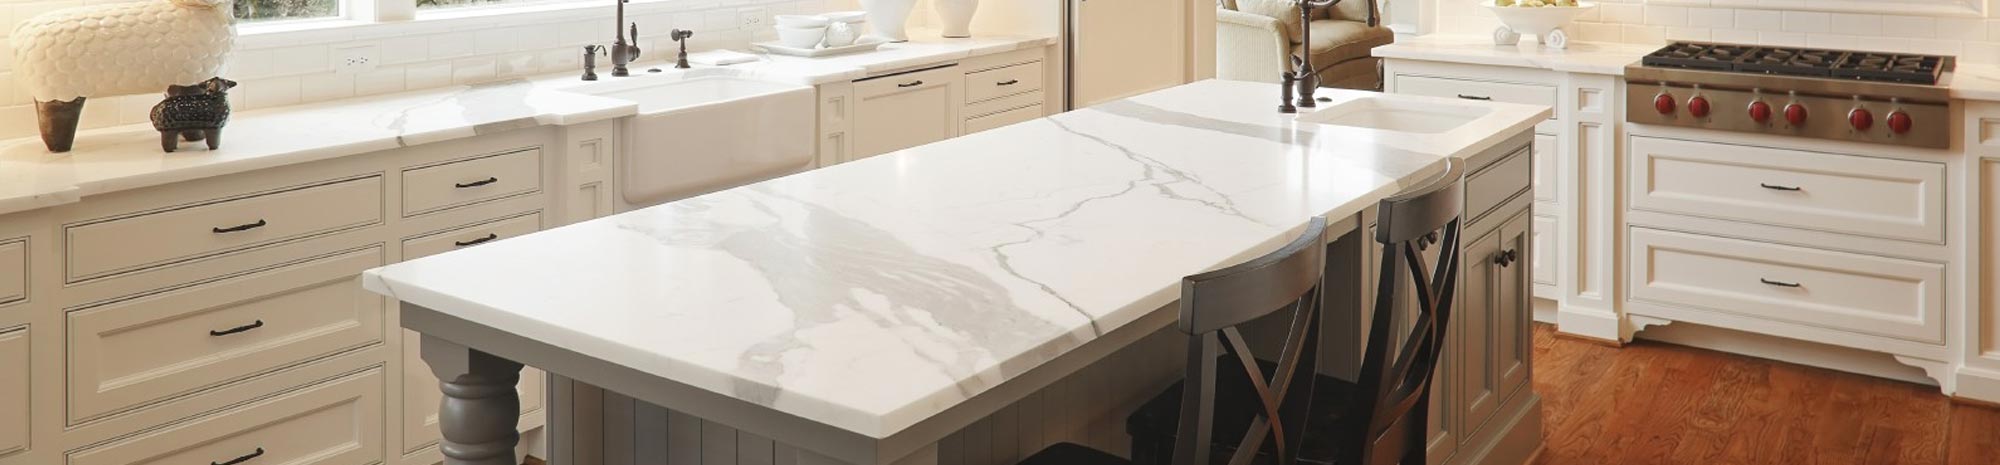 Chicago US White Marble Countertops : Licensed, Bonded and Insured